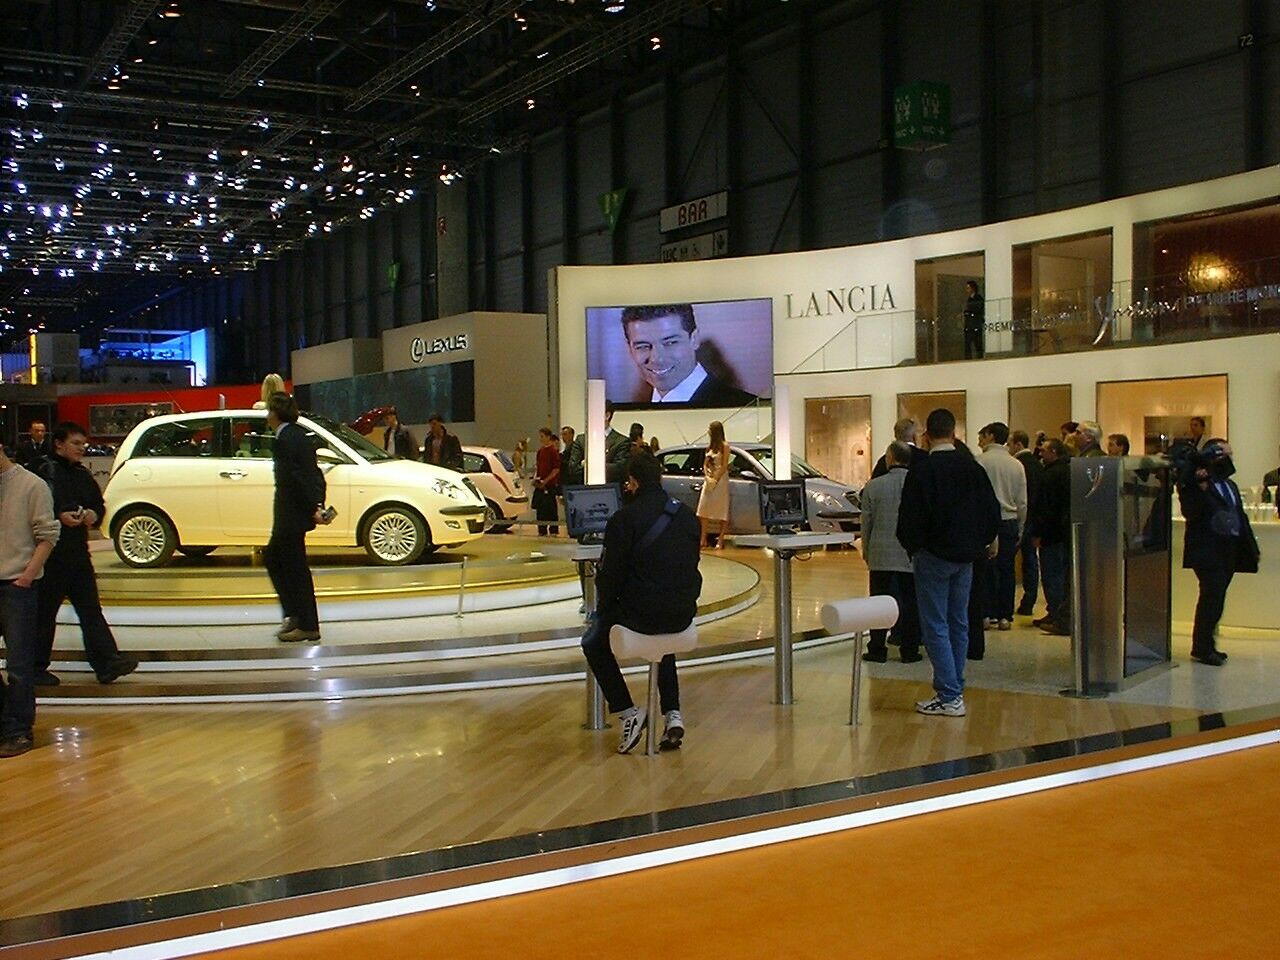 the Lancia stand at the 2003 Geneva Motor Show